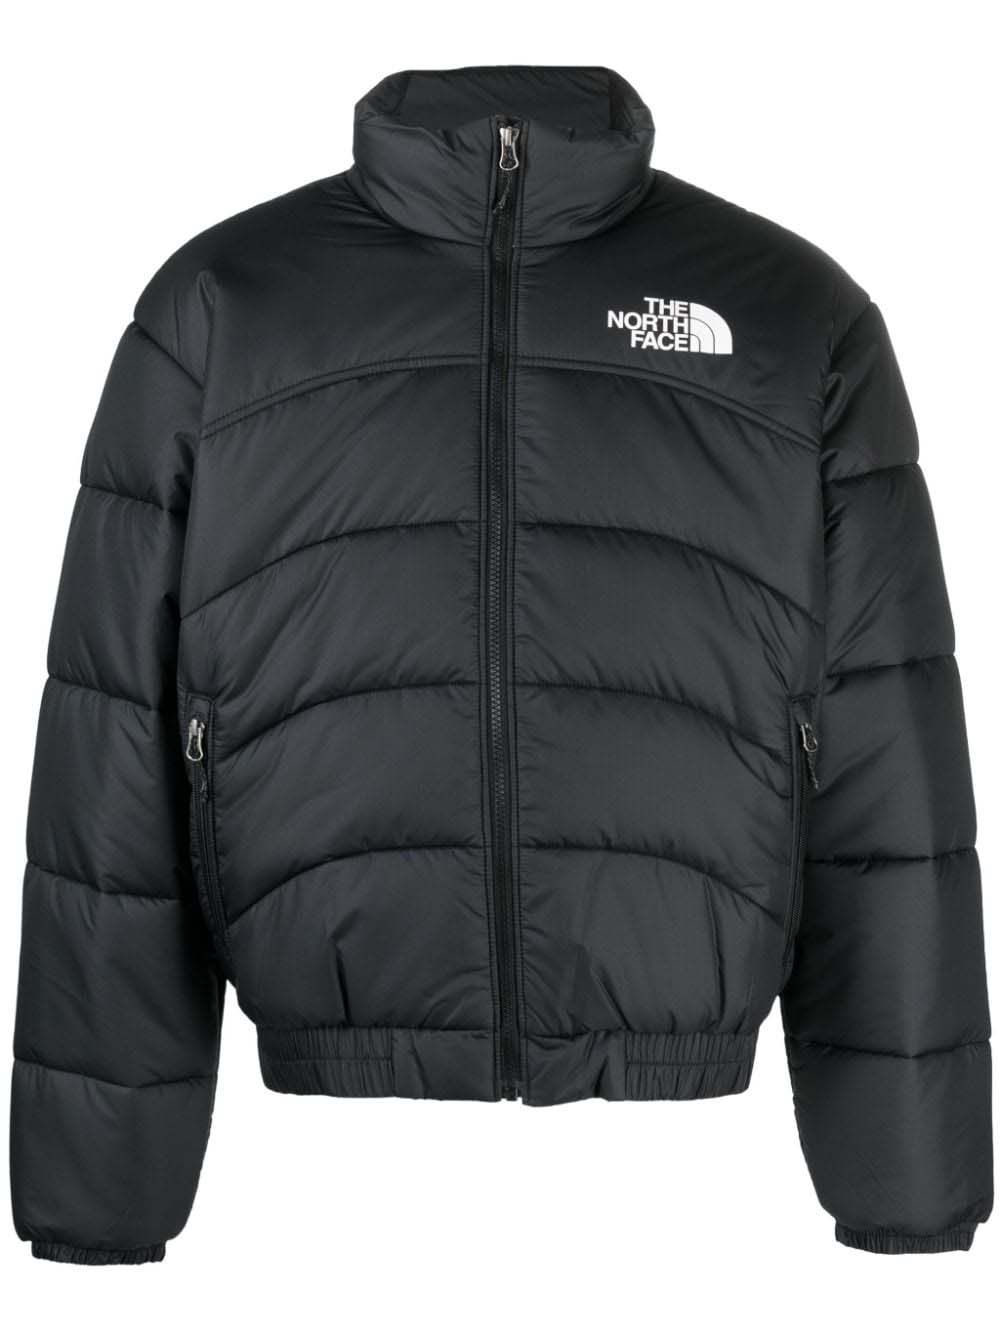 The North Face Remastered Nuptse Puffer Jacket Black Men's 